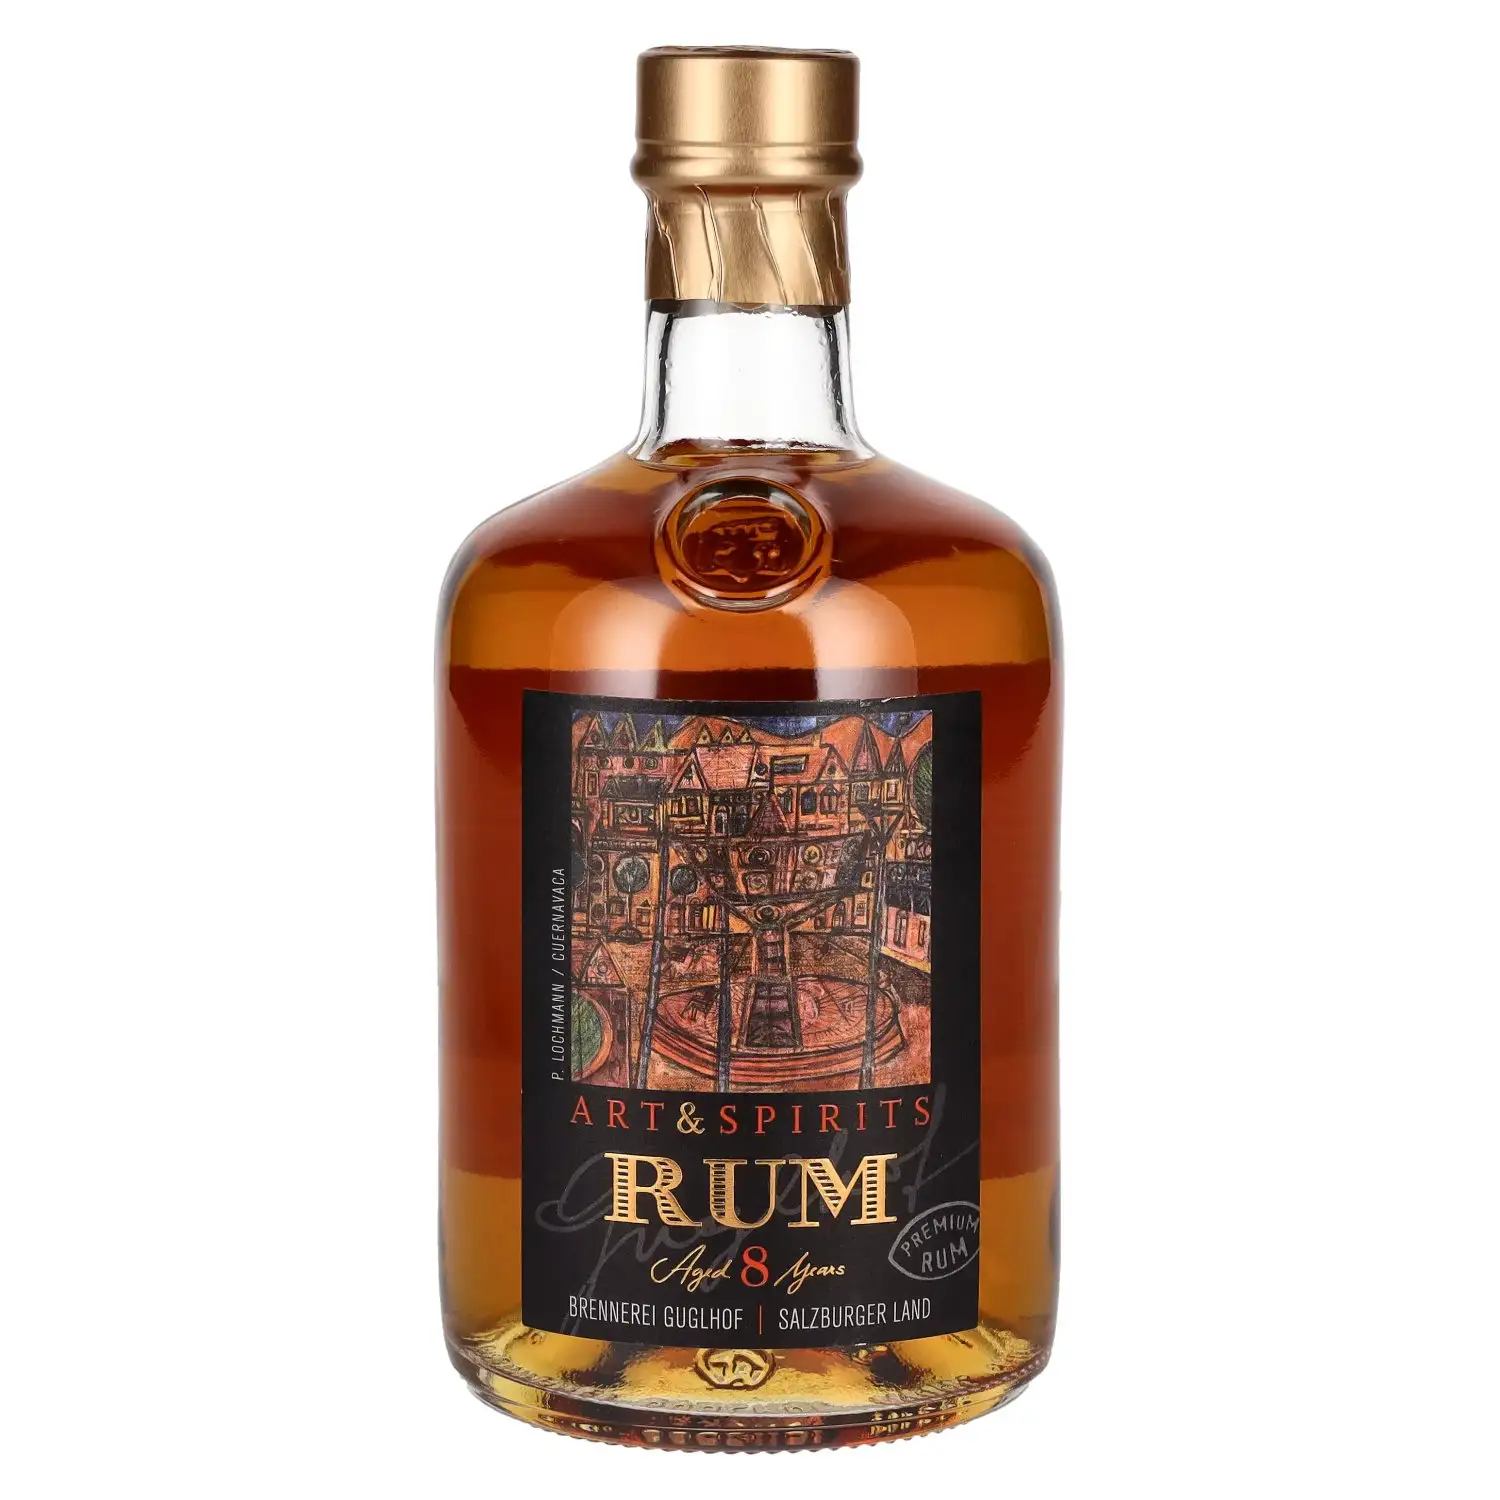 Image of the front of the bottle of the rum Art & Spirits Premium Rum